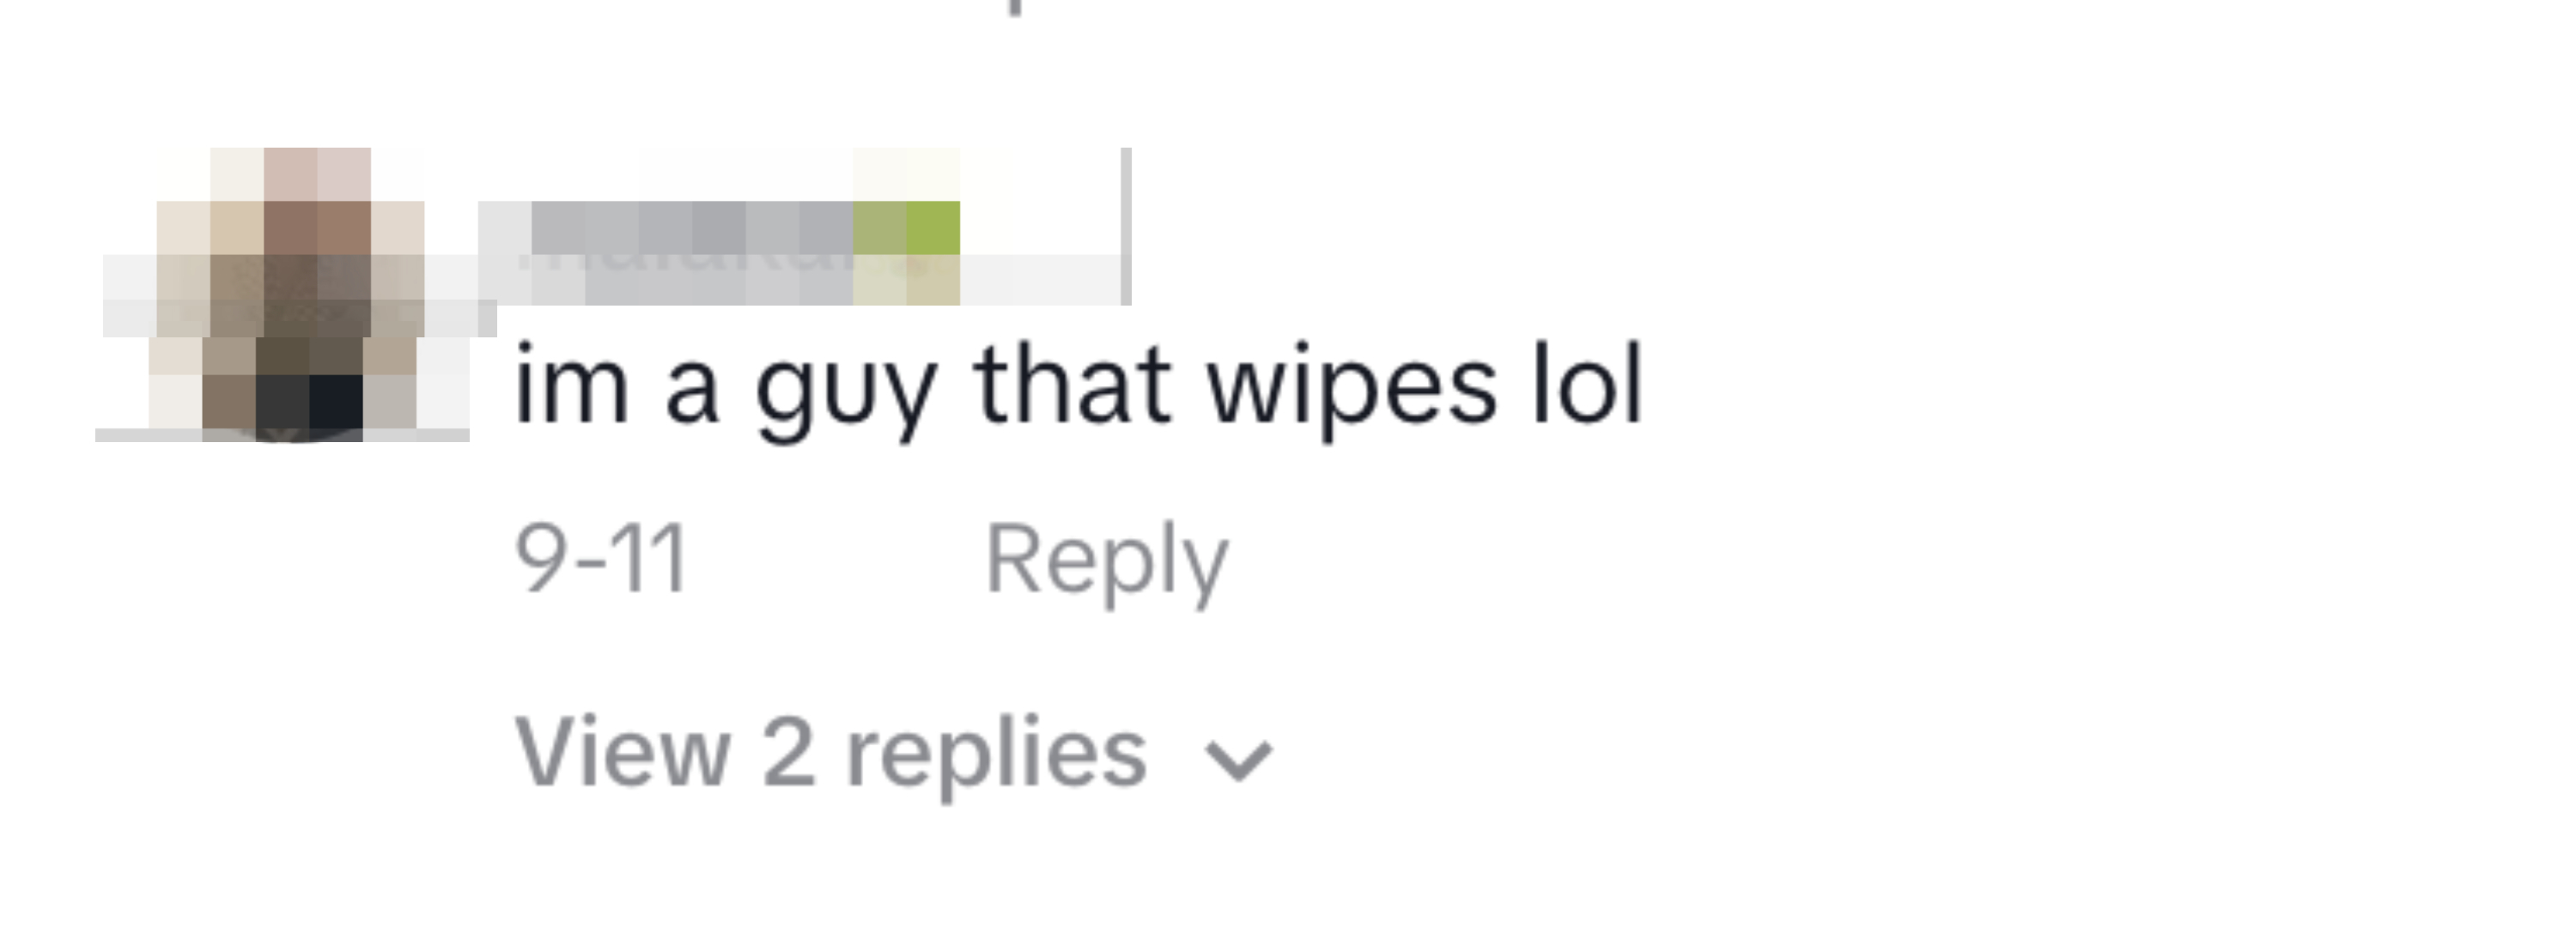 &quot;im a guy that wipes lol&quot;